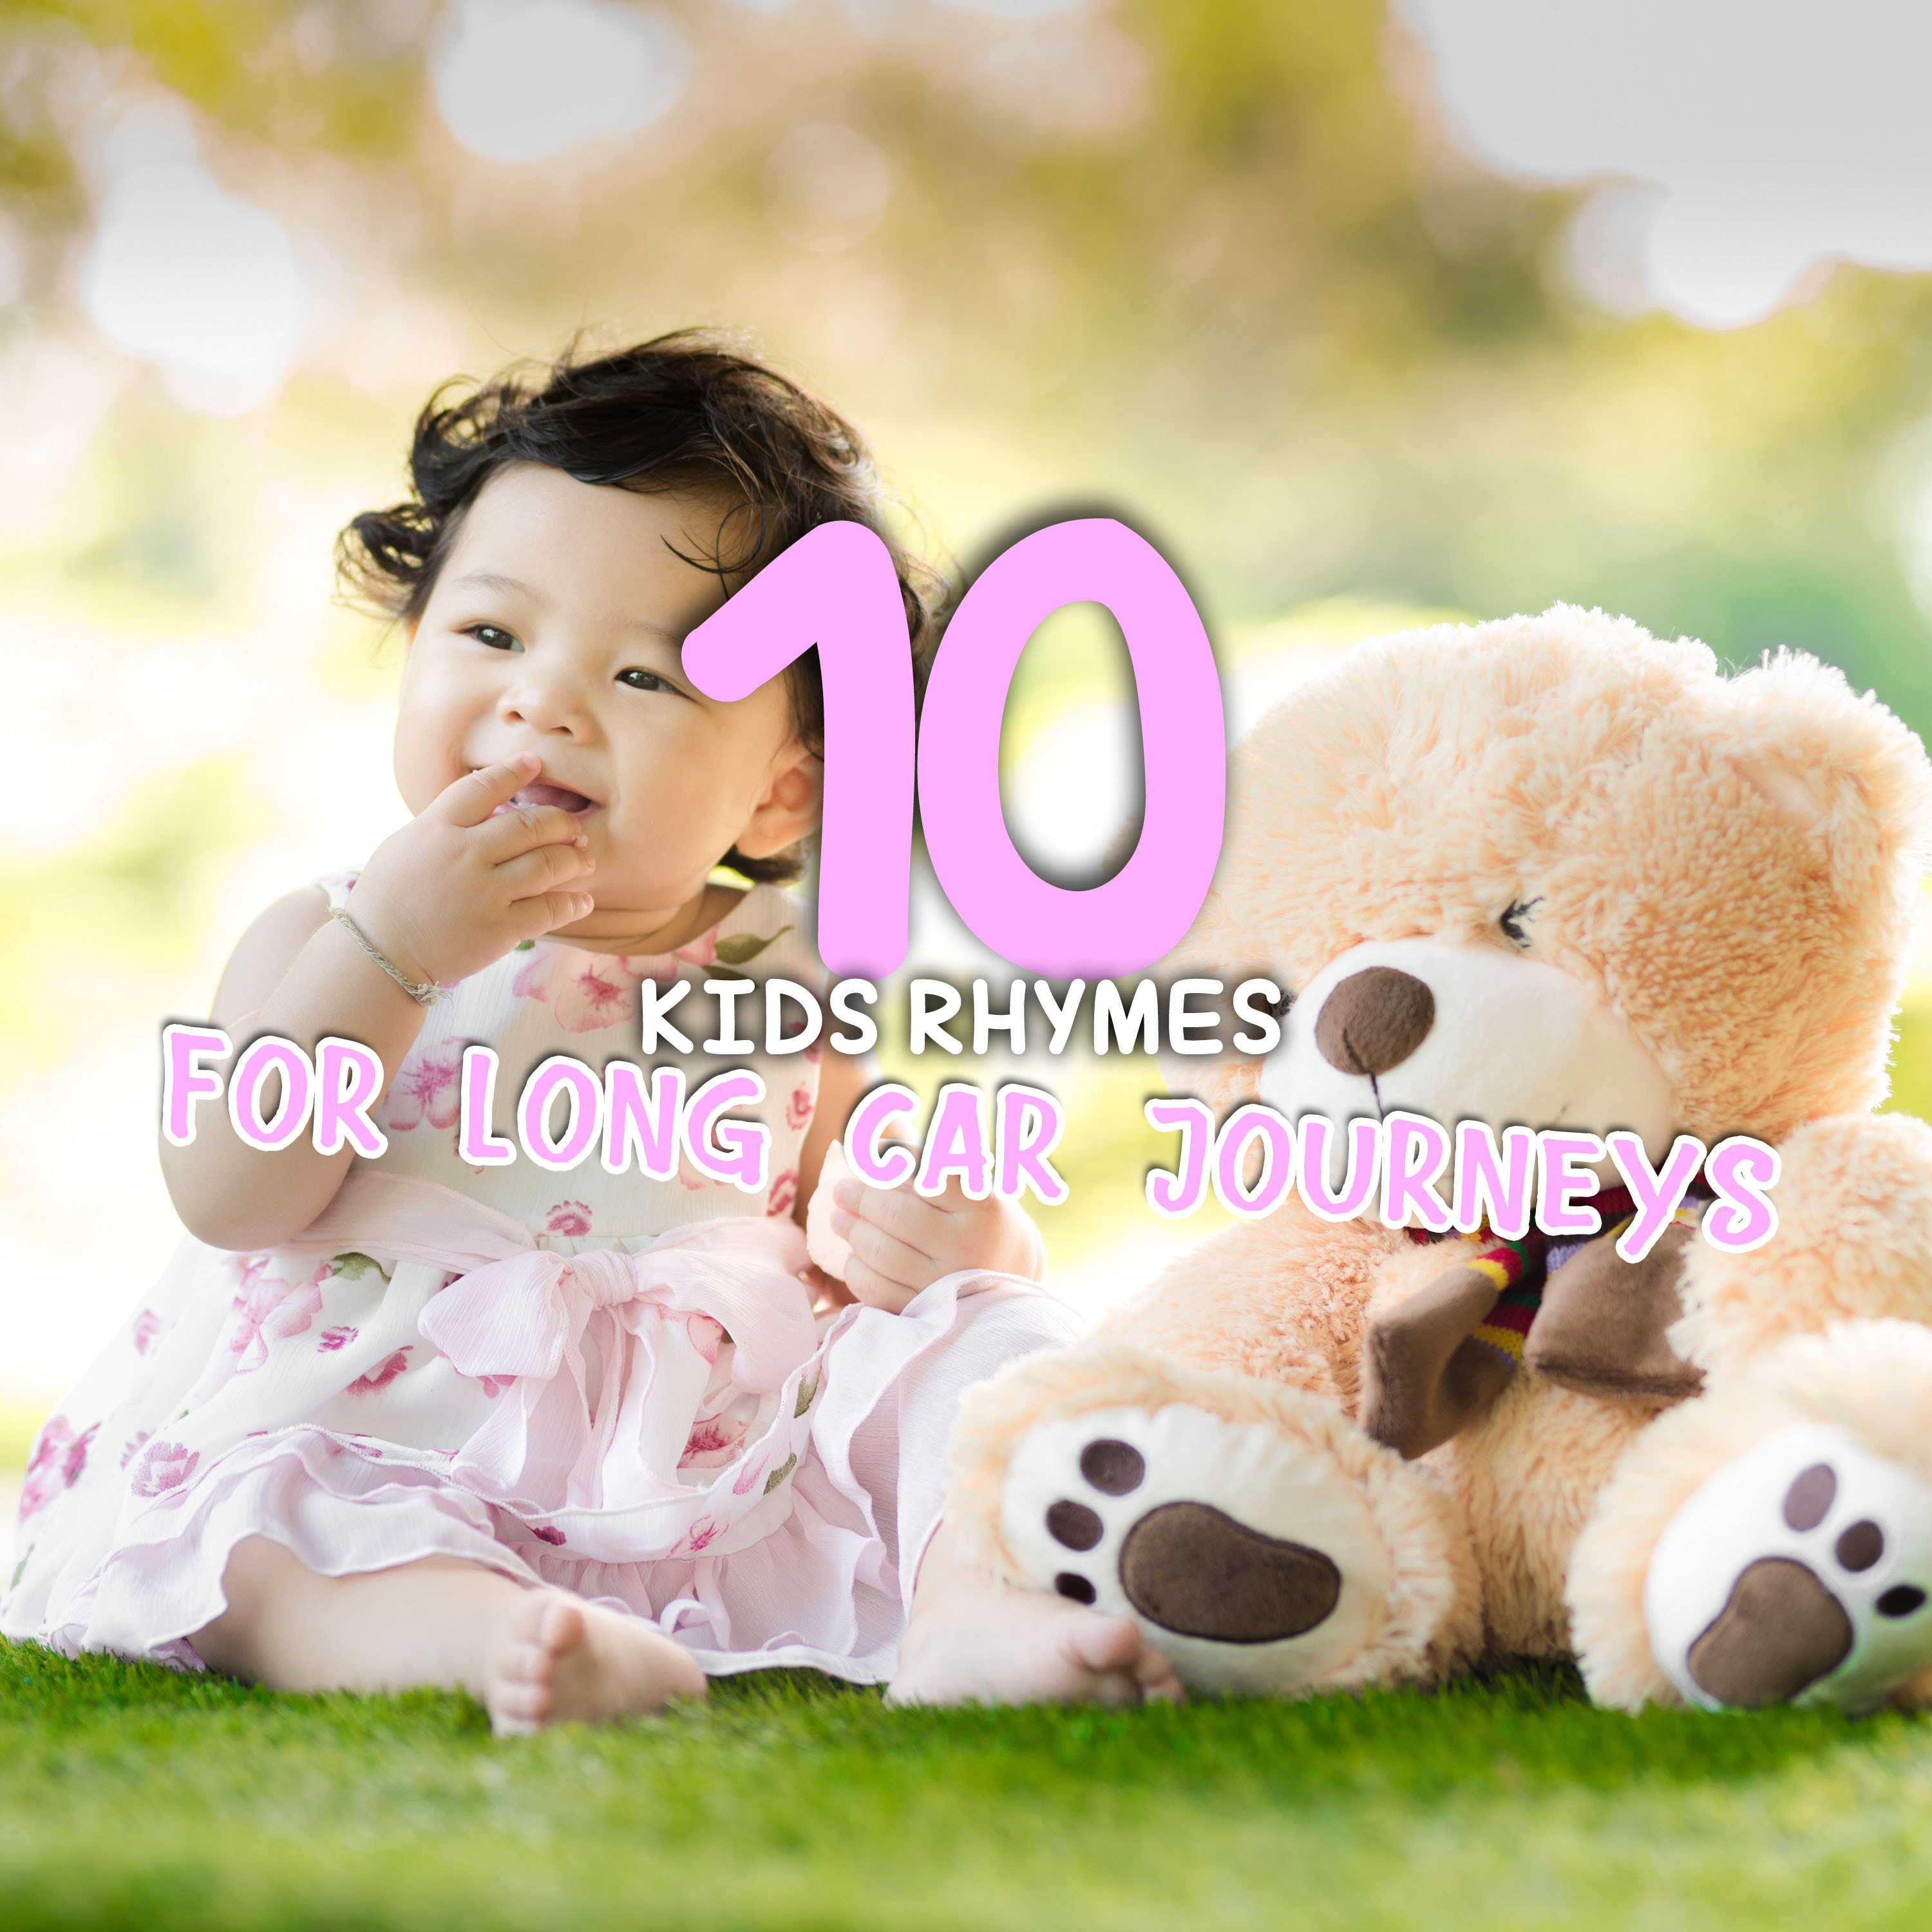 #10 Kids Rhymes for Long Car Journeys